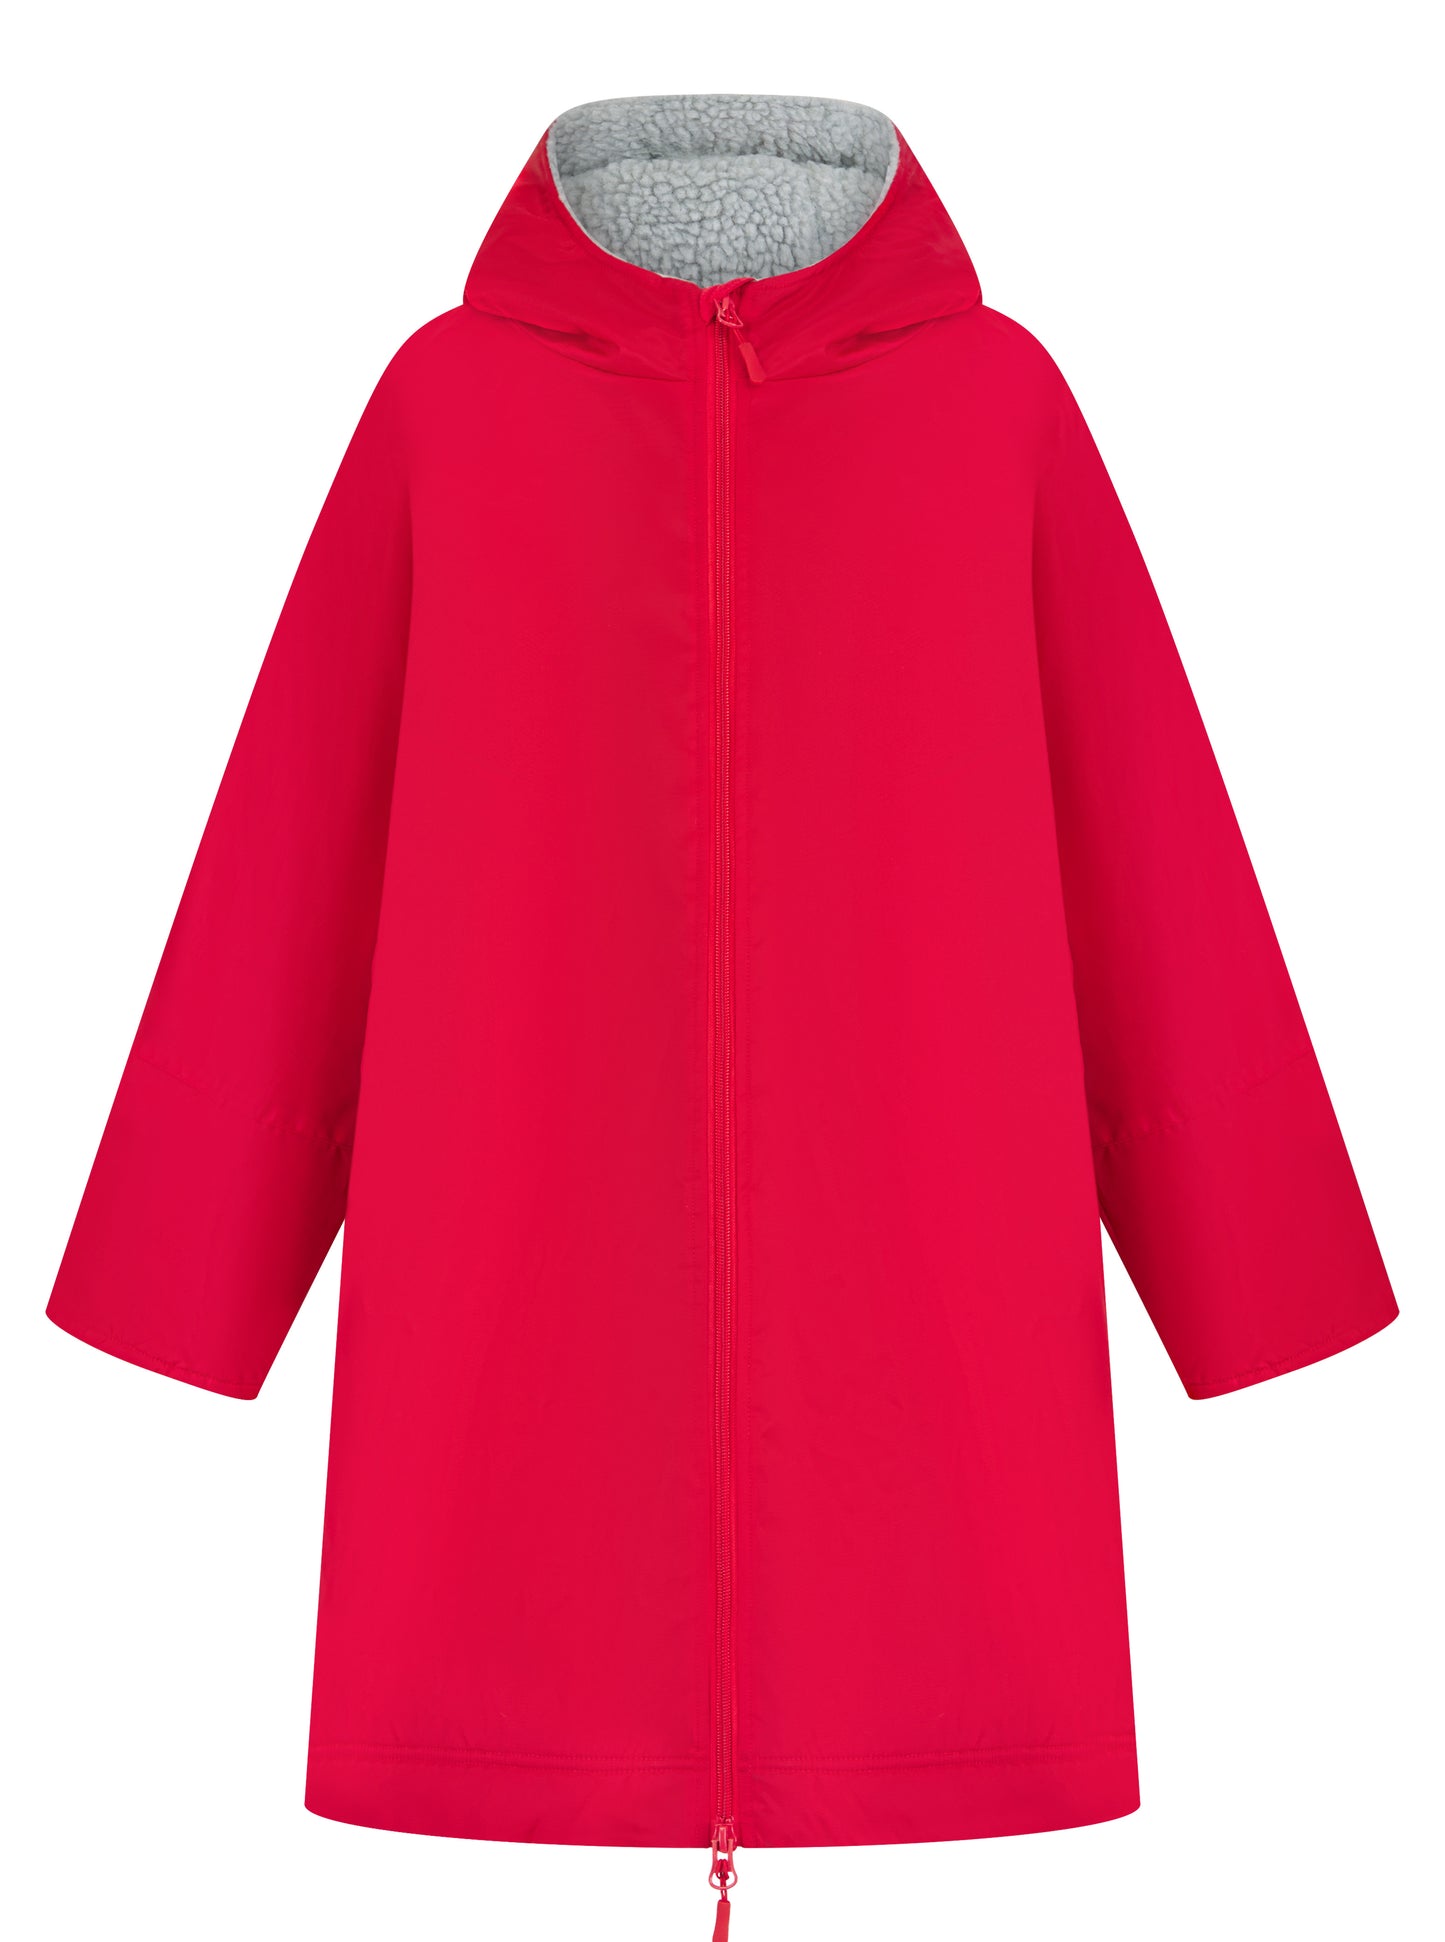 Personalised Robes - Navy Finden & Hales Kids all-weather robe